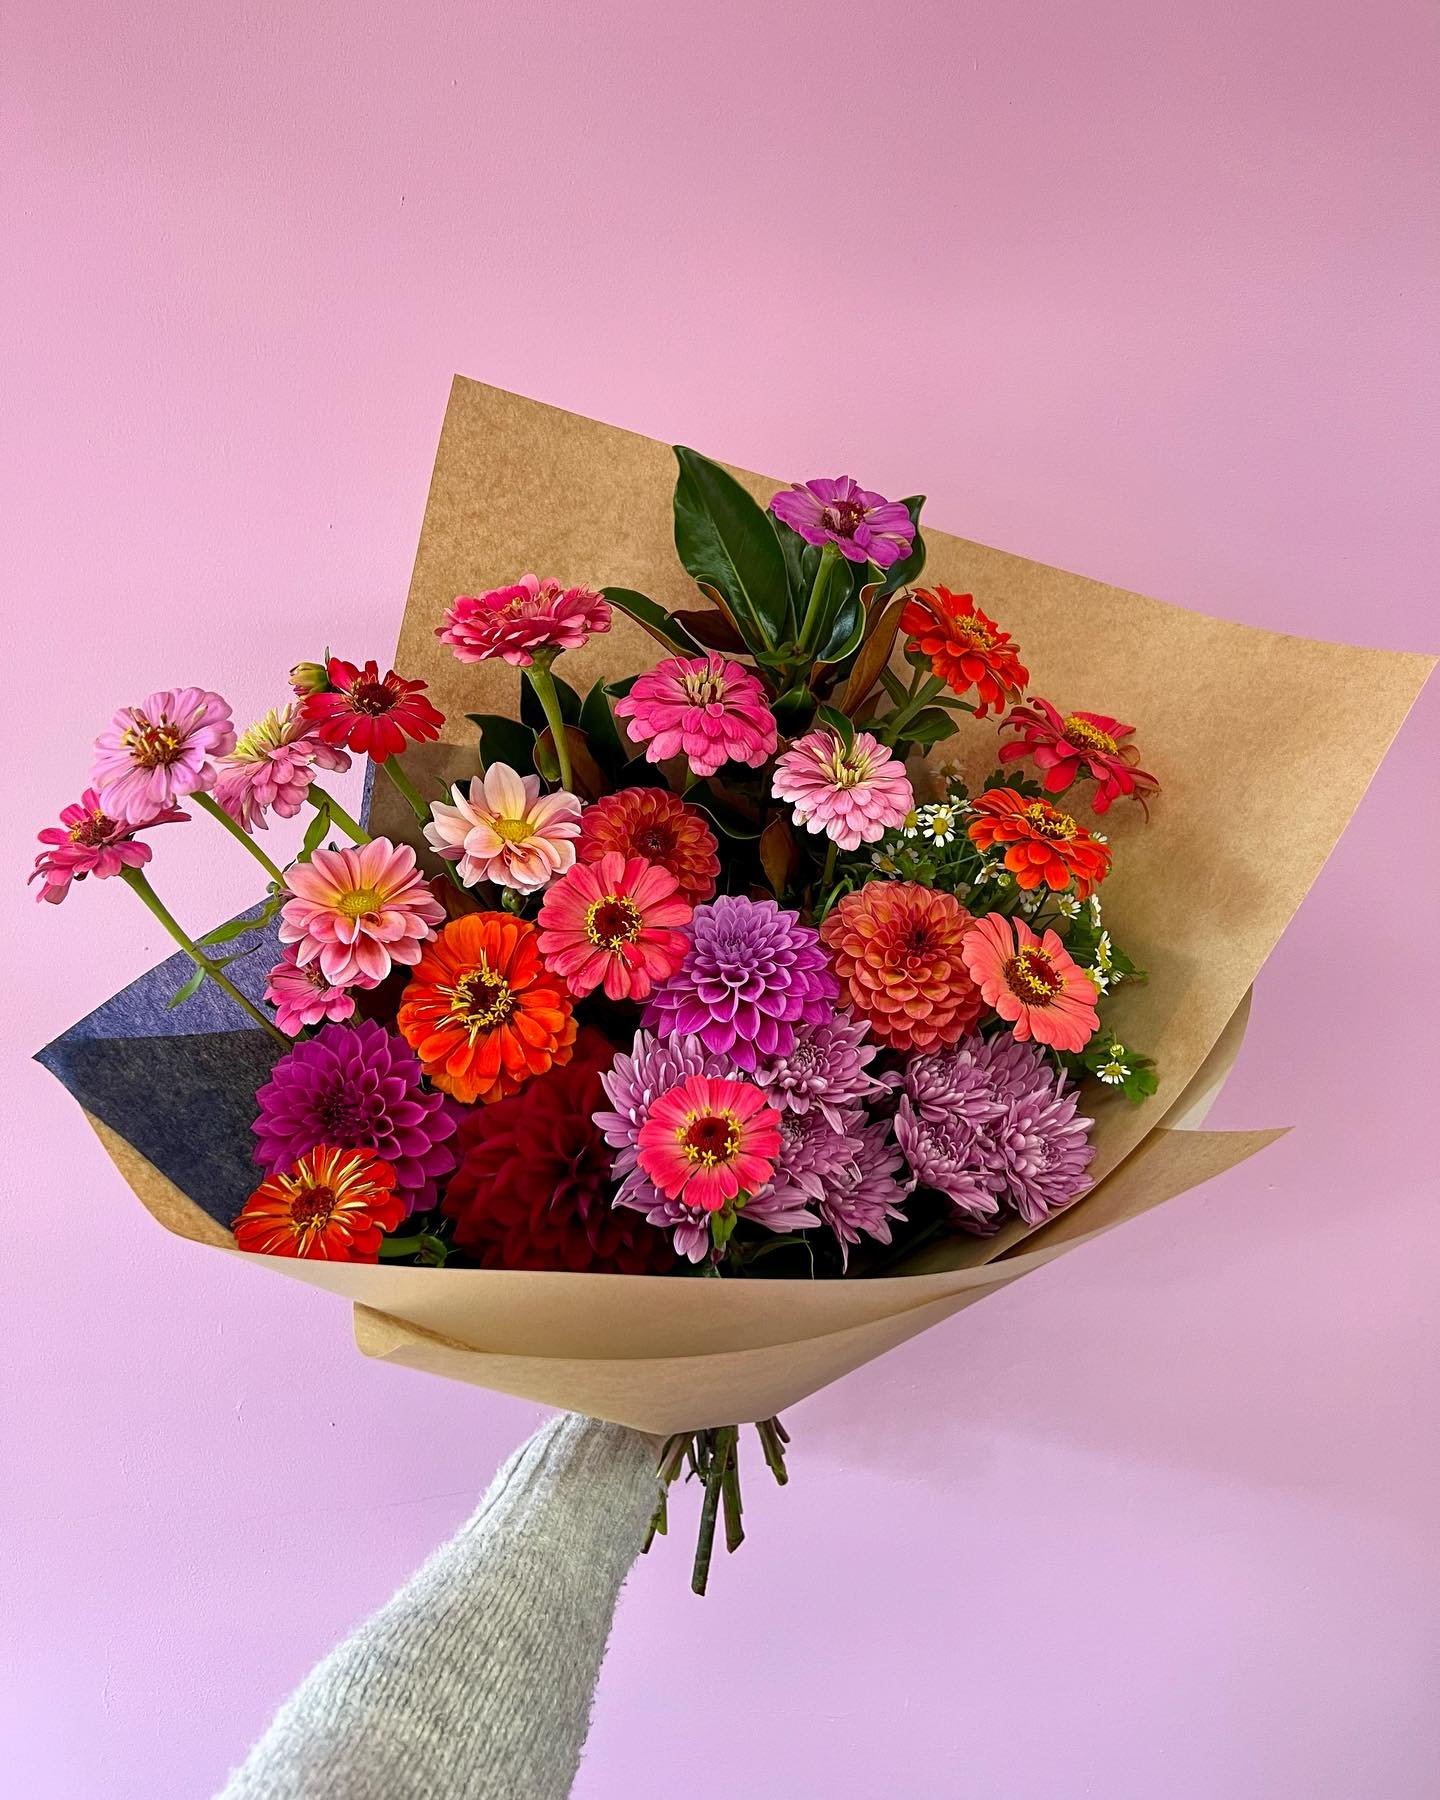 🌼MOTHER&rsquo;S DAY SUNDAY 12th MAY🌼
💥 Order now so you don&rsquo;t miss out 💥 
Cut off Friday 10th May 
Open Saturday and Sunday for delivery and pick up 🚚 
Text or call 0437378150
DM on Instagram or Facebook
www.billie-loufloralstudio.com.au